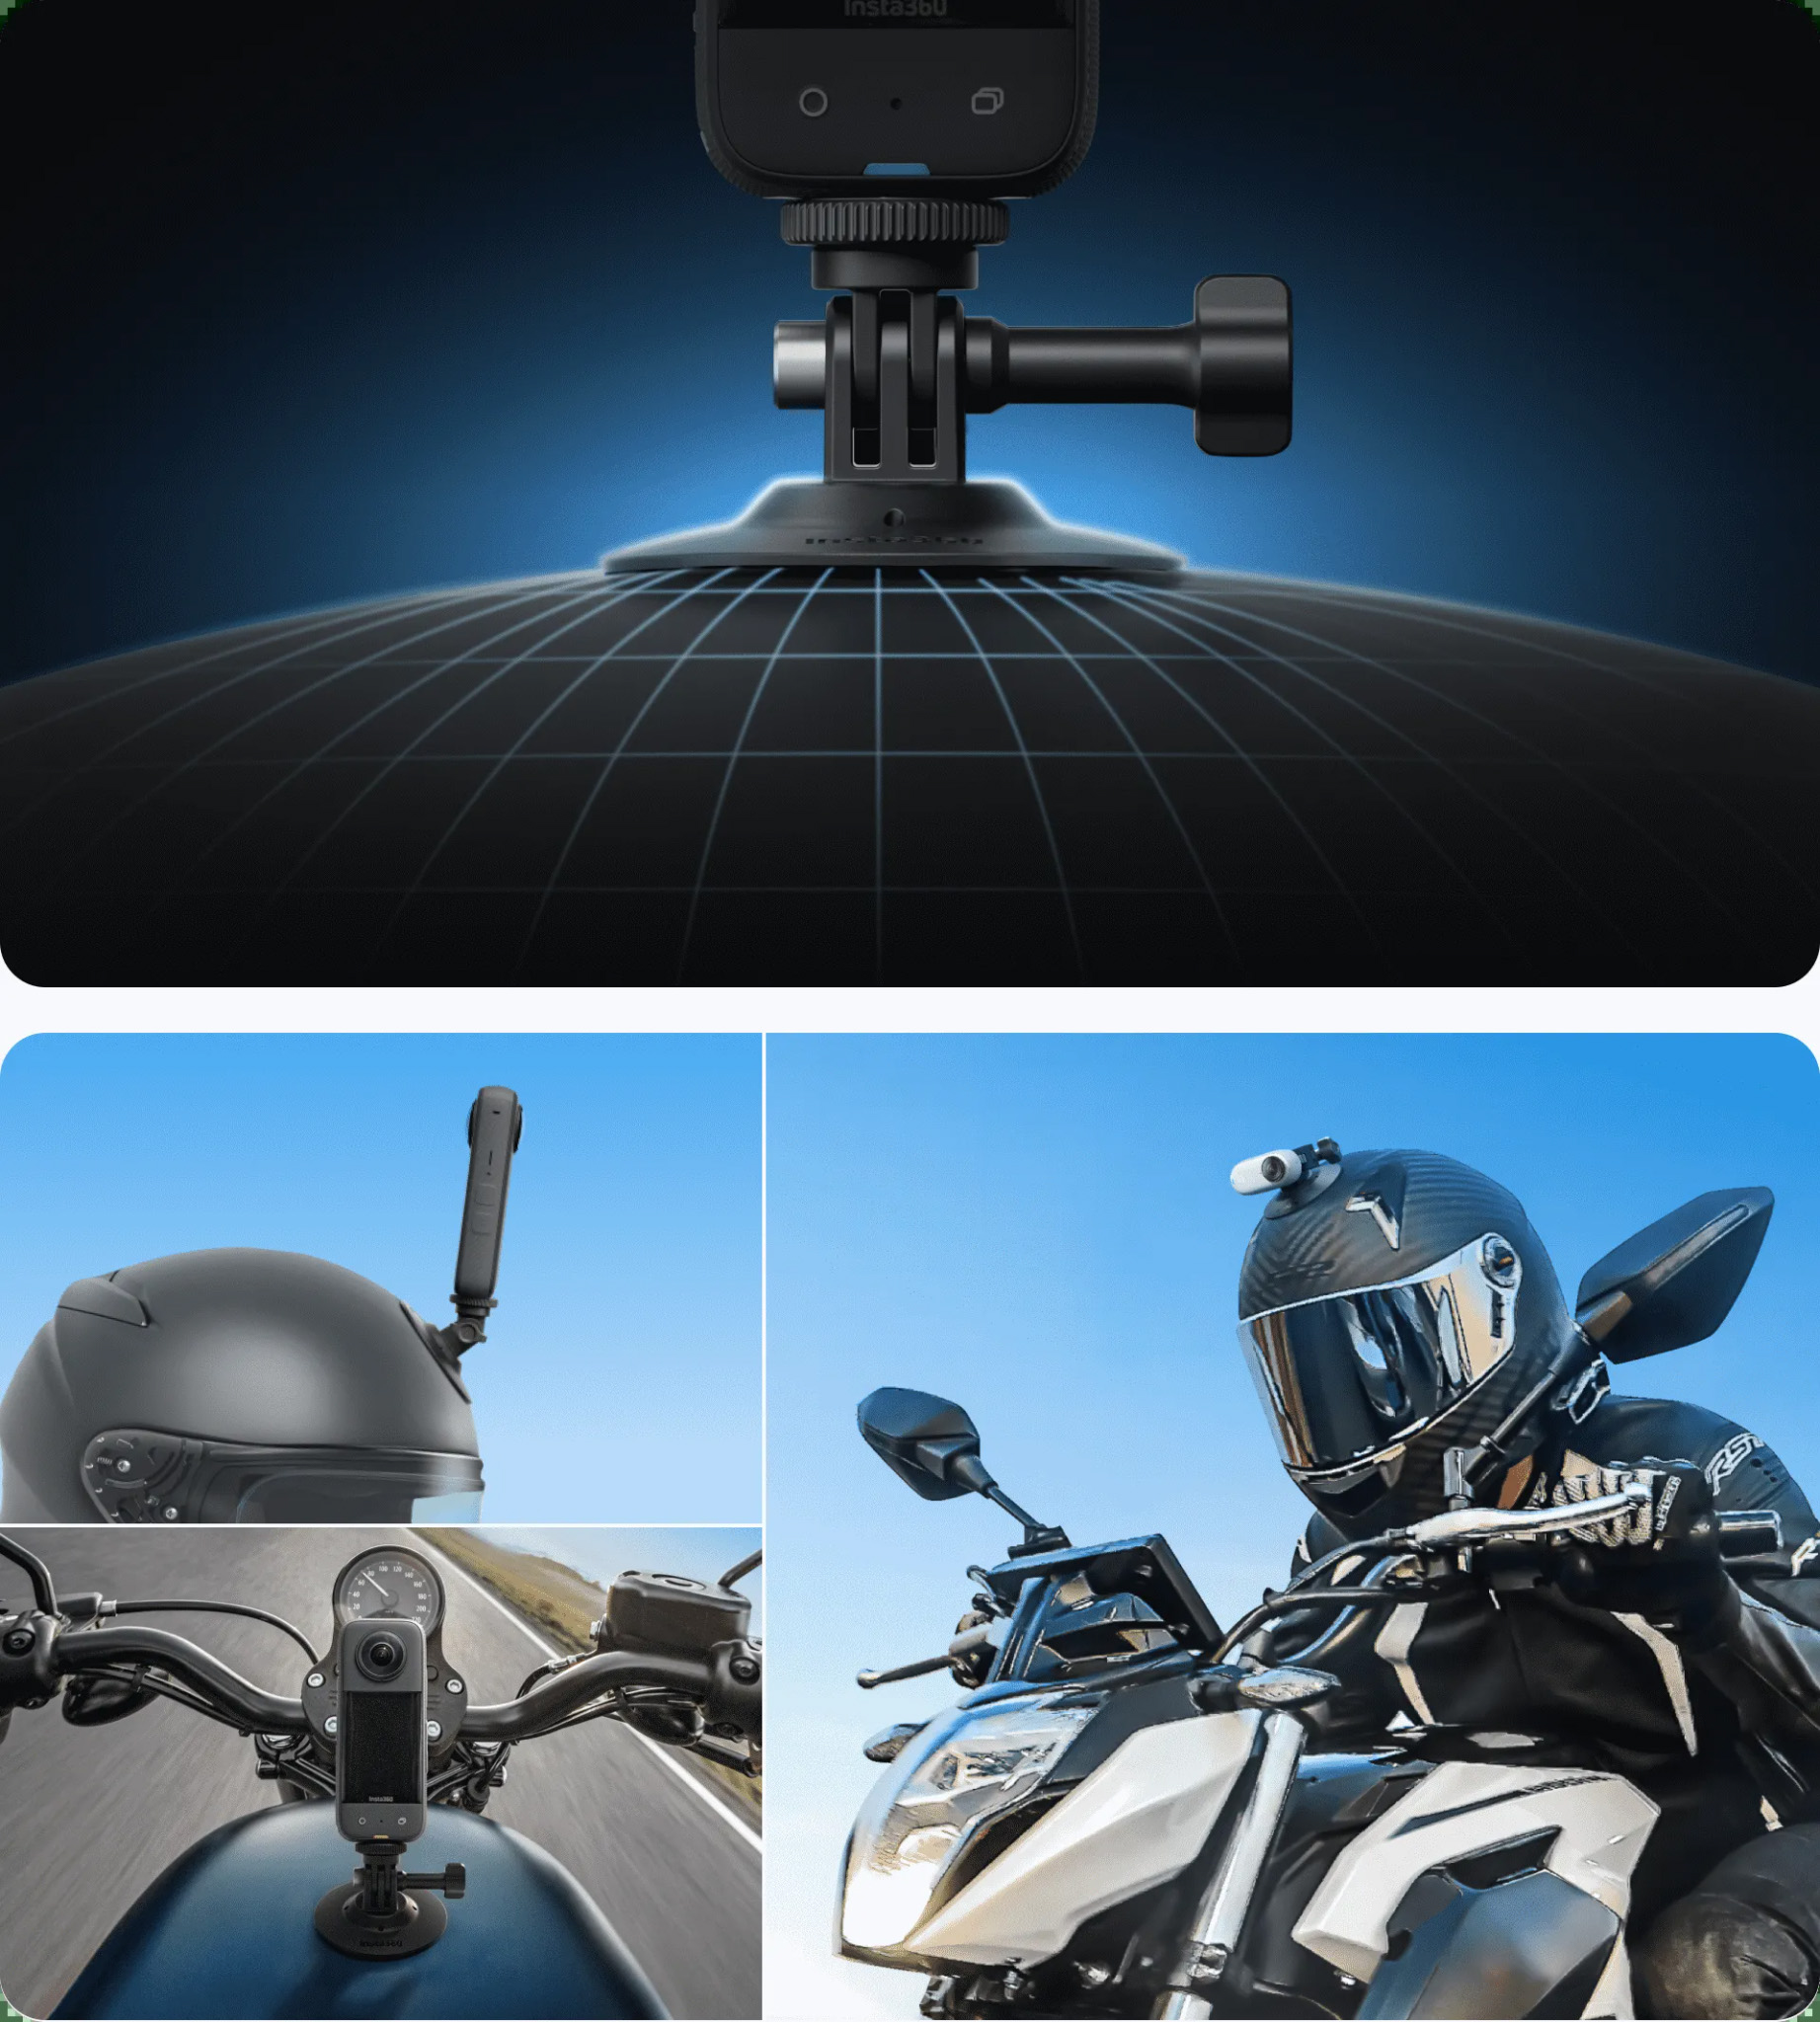 Insta360 X3 Motorcycle Mount Bundle - new - Flexible adhesive mount for even more options. Designed for curved surfaces, guaranteed to stick.